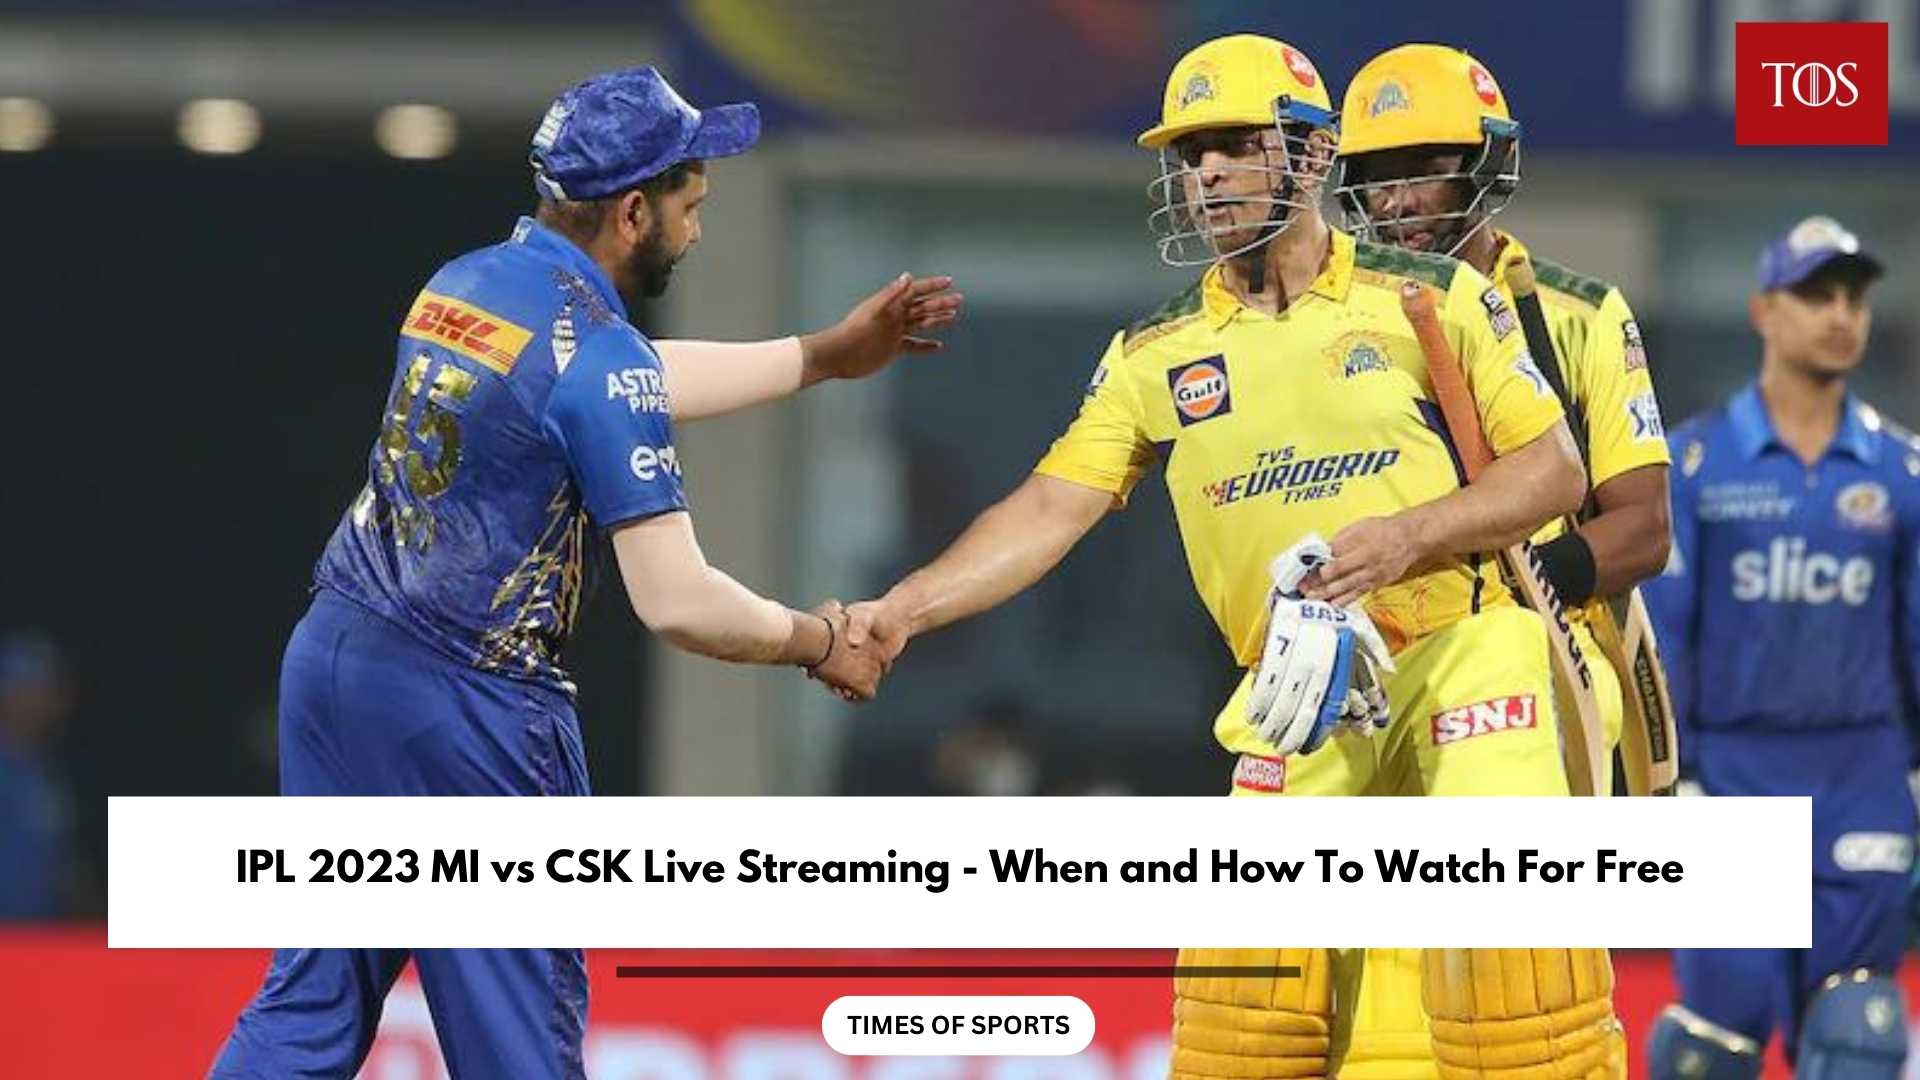 IPL 2023 MI vs CSK Live Streaming When and How To Watch For Free